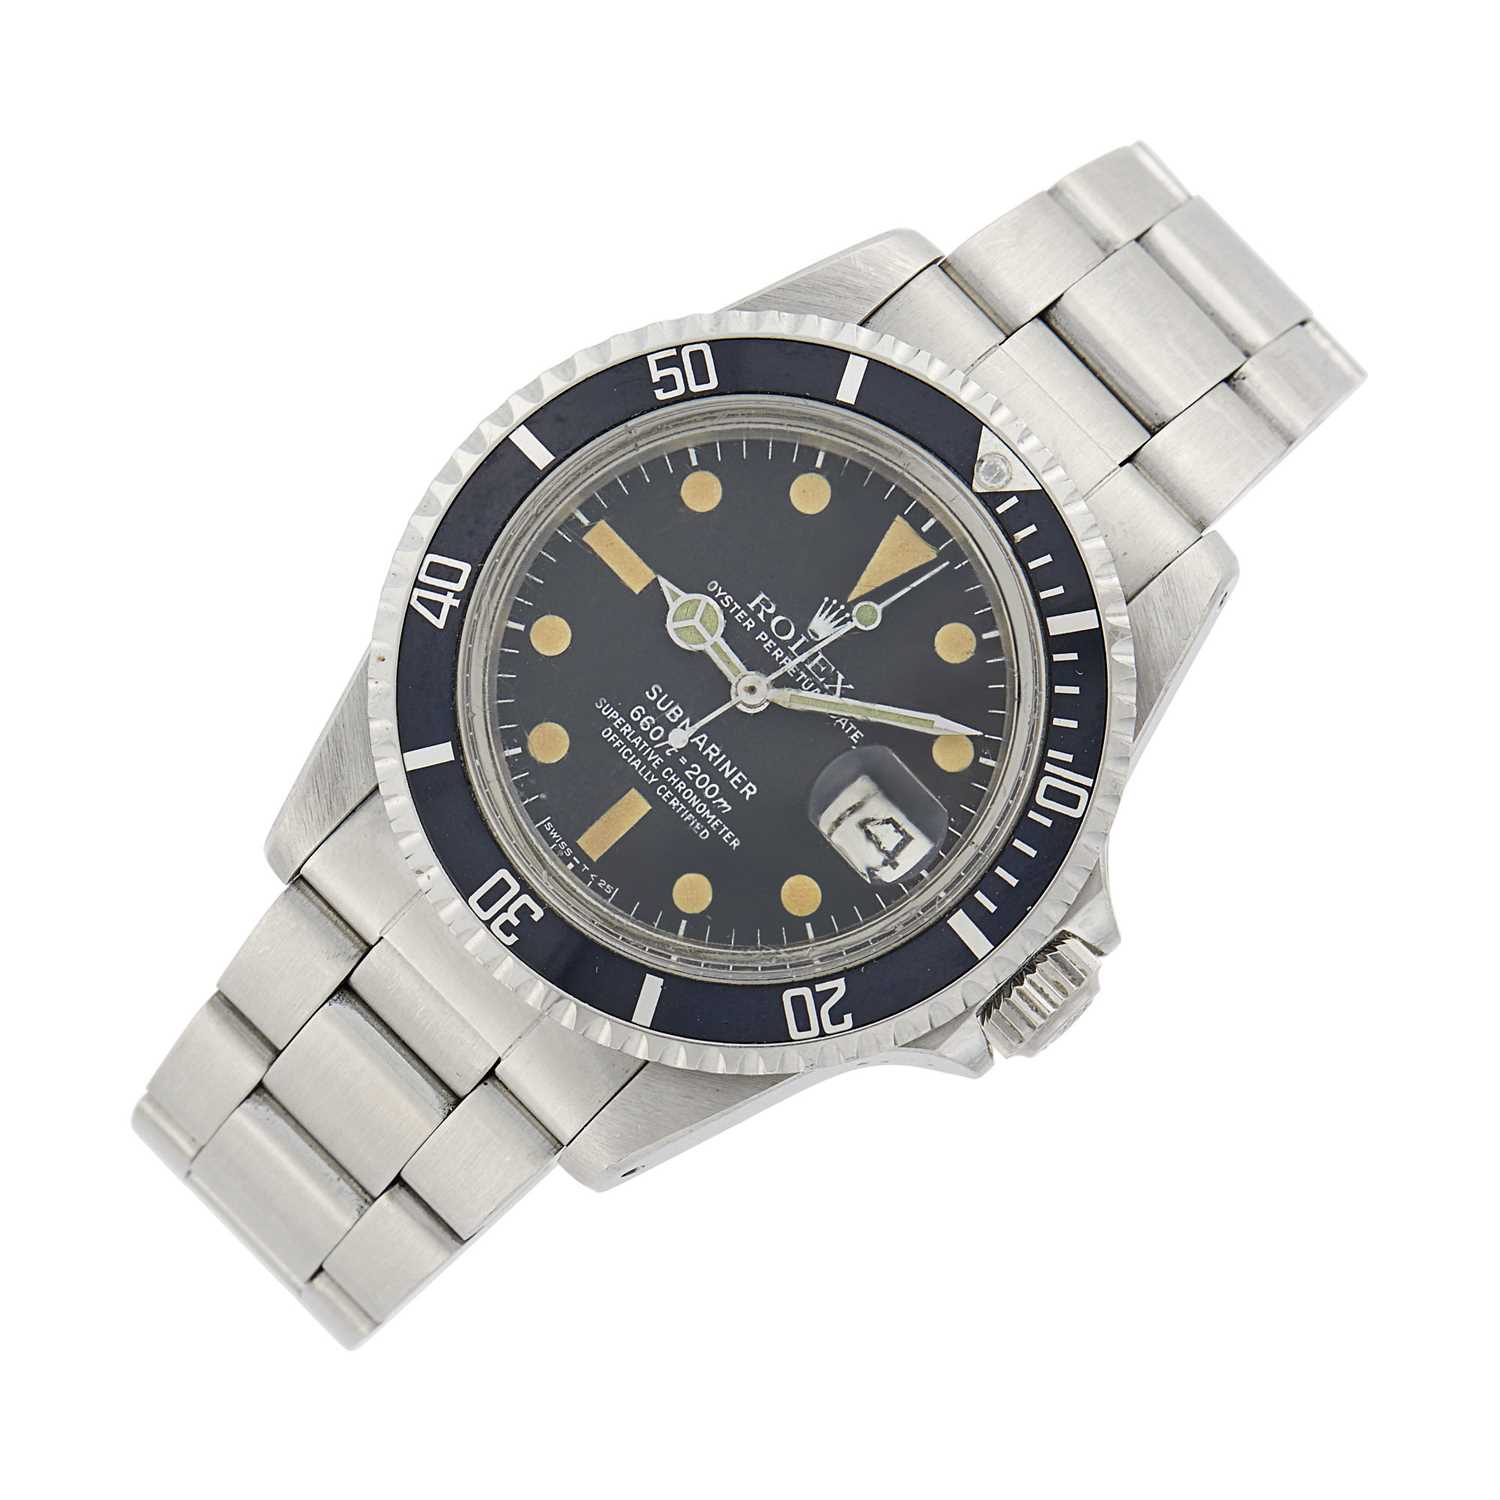 Lot 39 - Rolex Stainless Steel 'Submariner' Oyster Perpetual Date Wristwatch, Ref. 1680